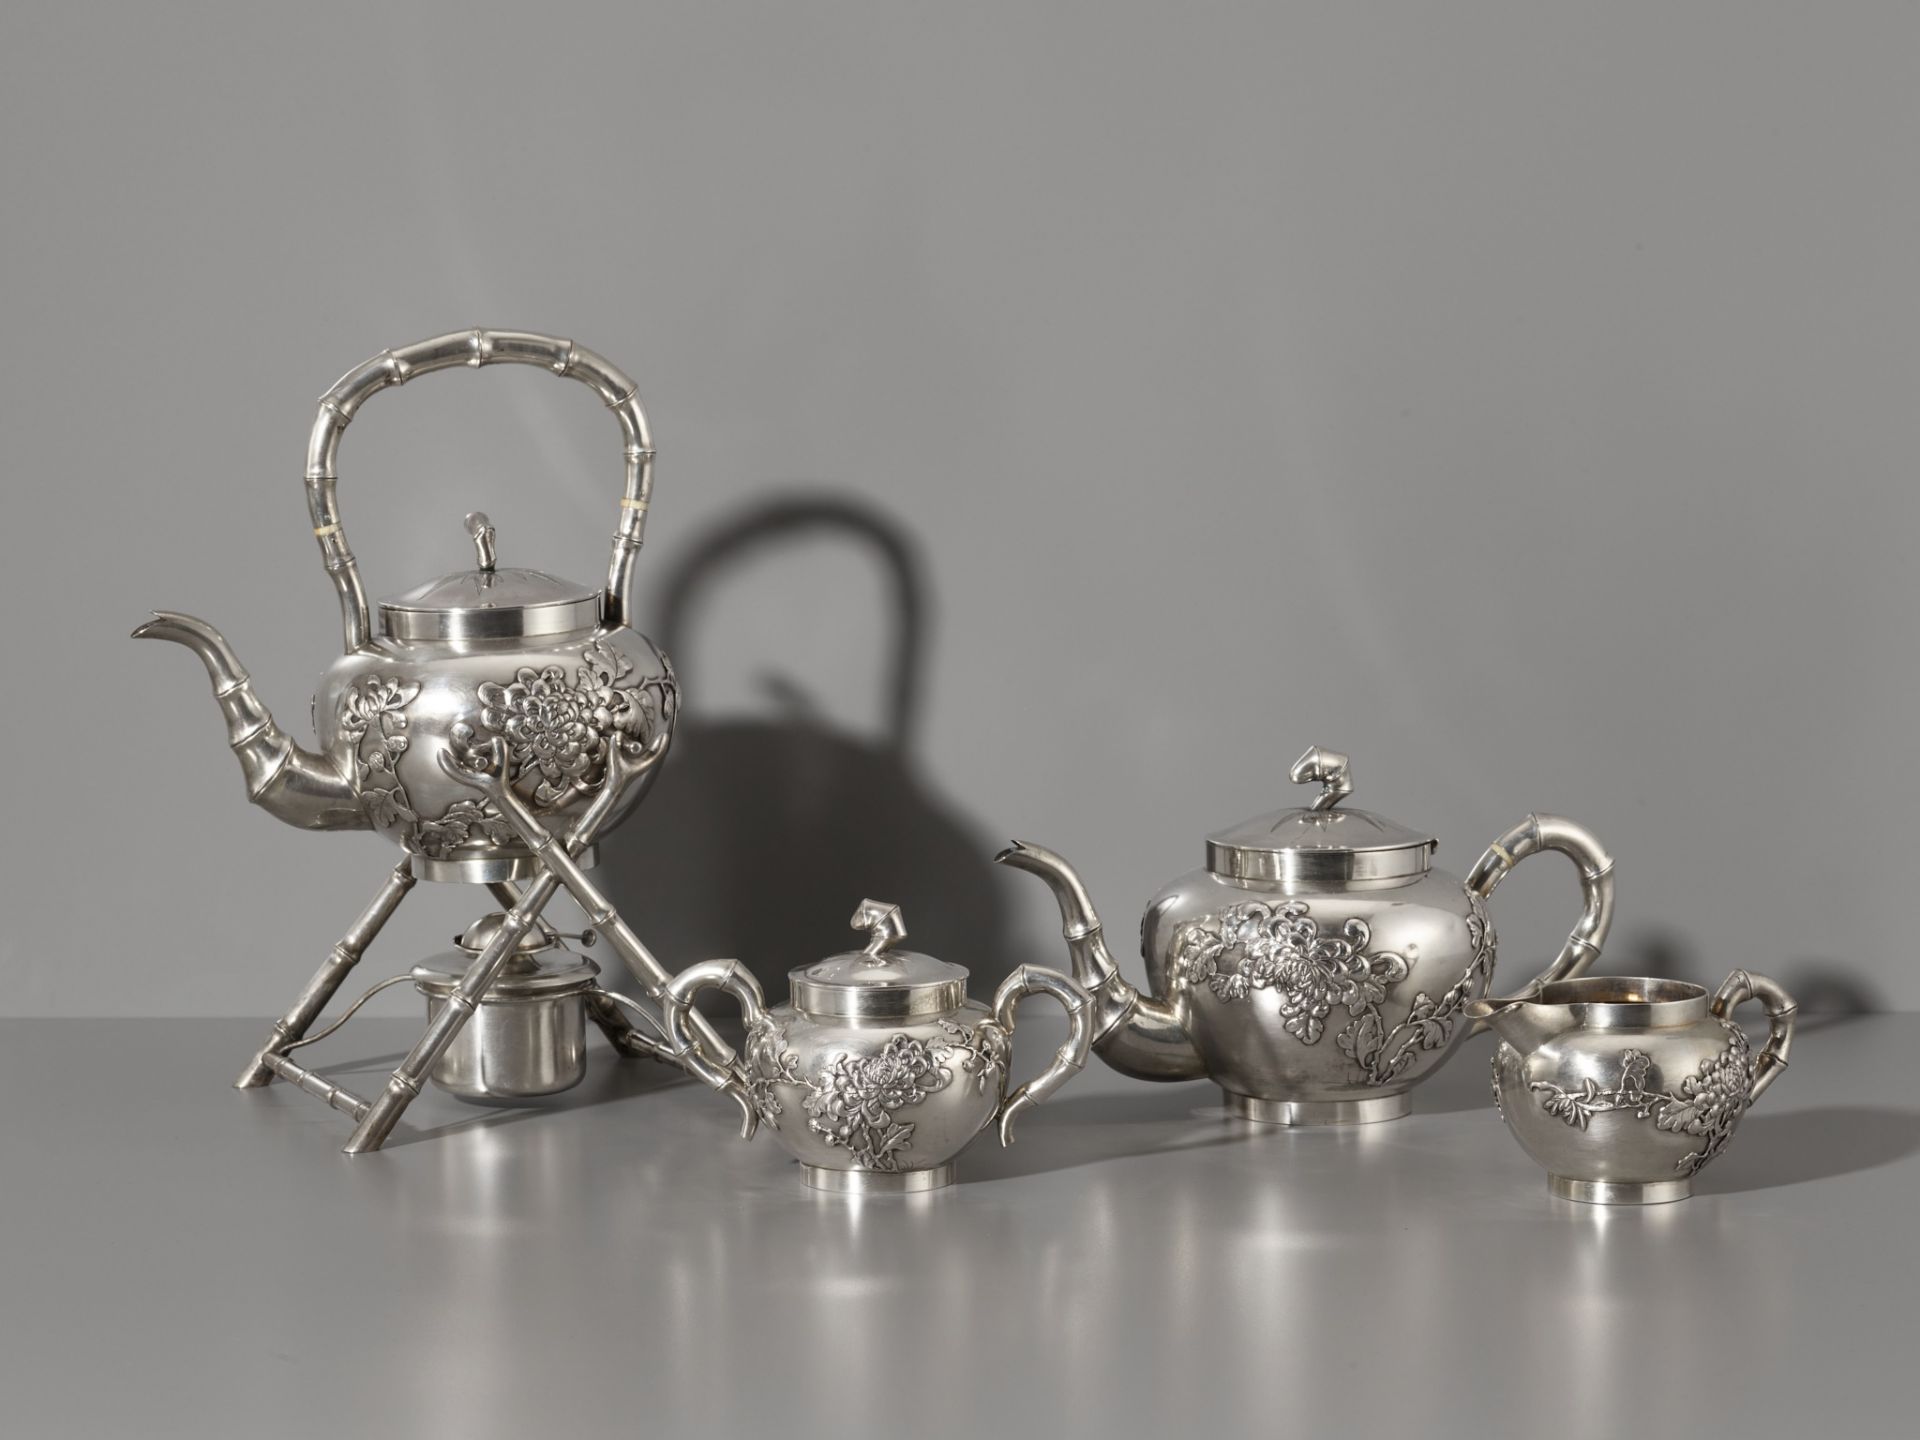 A SIX-PIECE ‘CHRYSANTHEMUM’ 900/1000 SILVER TEA & COFFEE SERVICE, OVER 2 KG TOTAL WEIGHT, LATE QING - Image 12 of 13